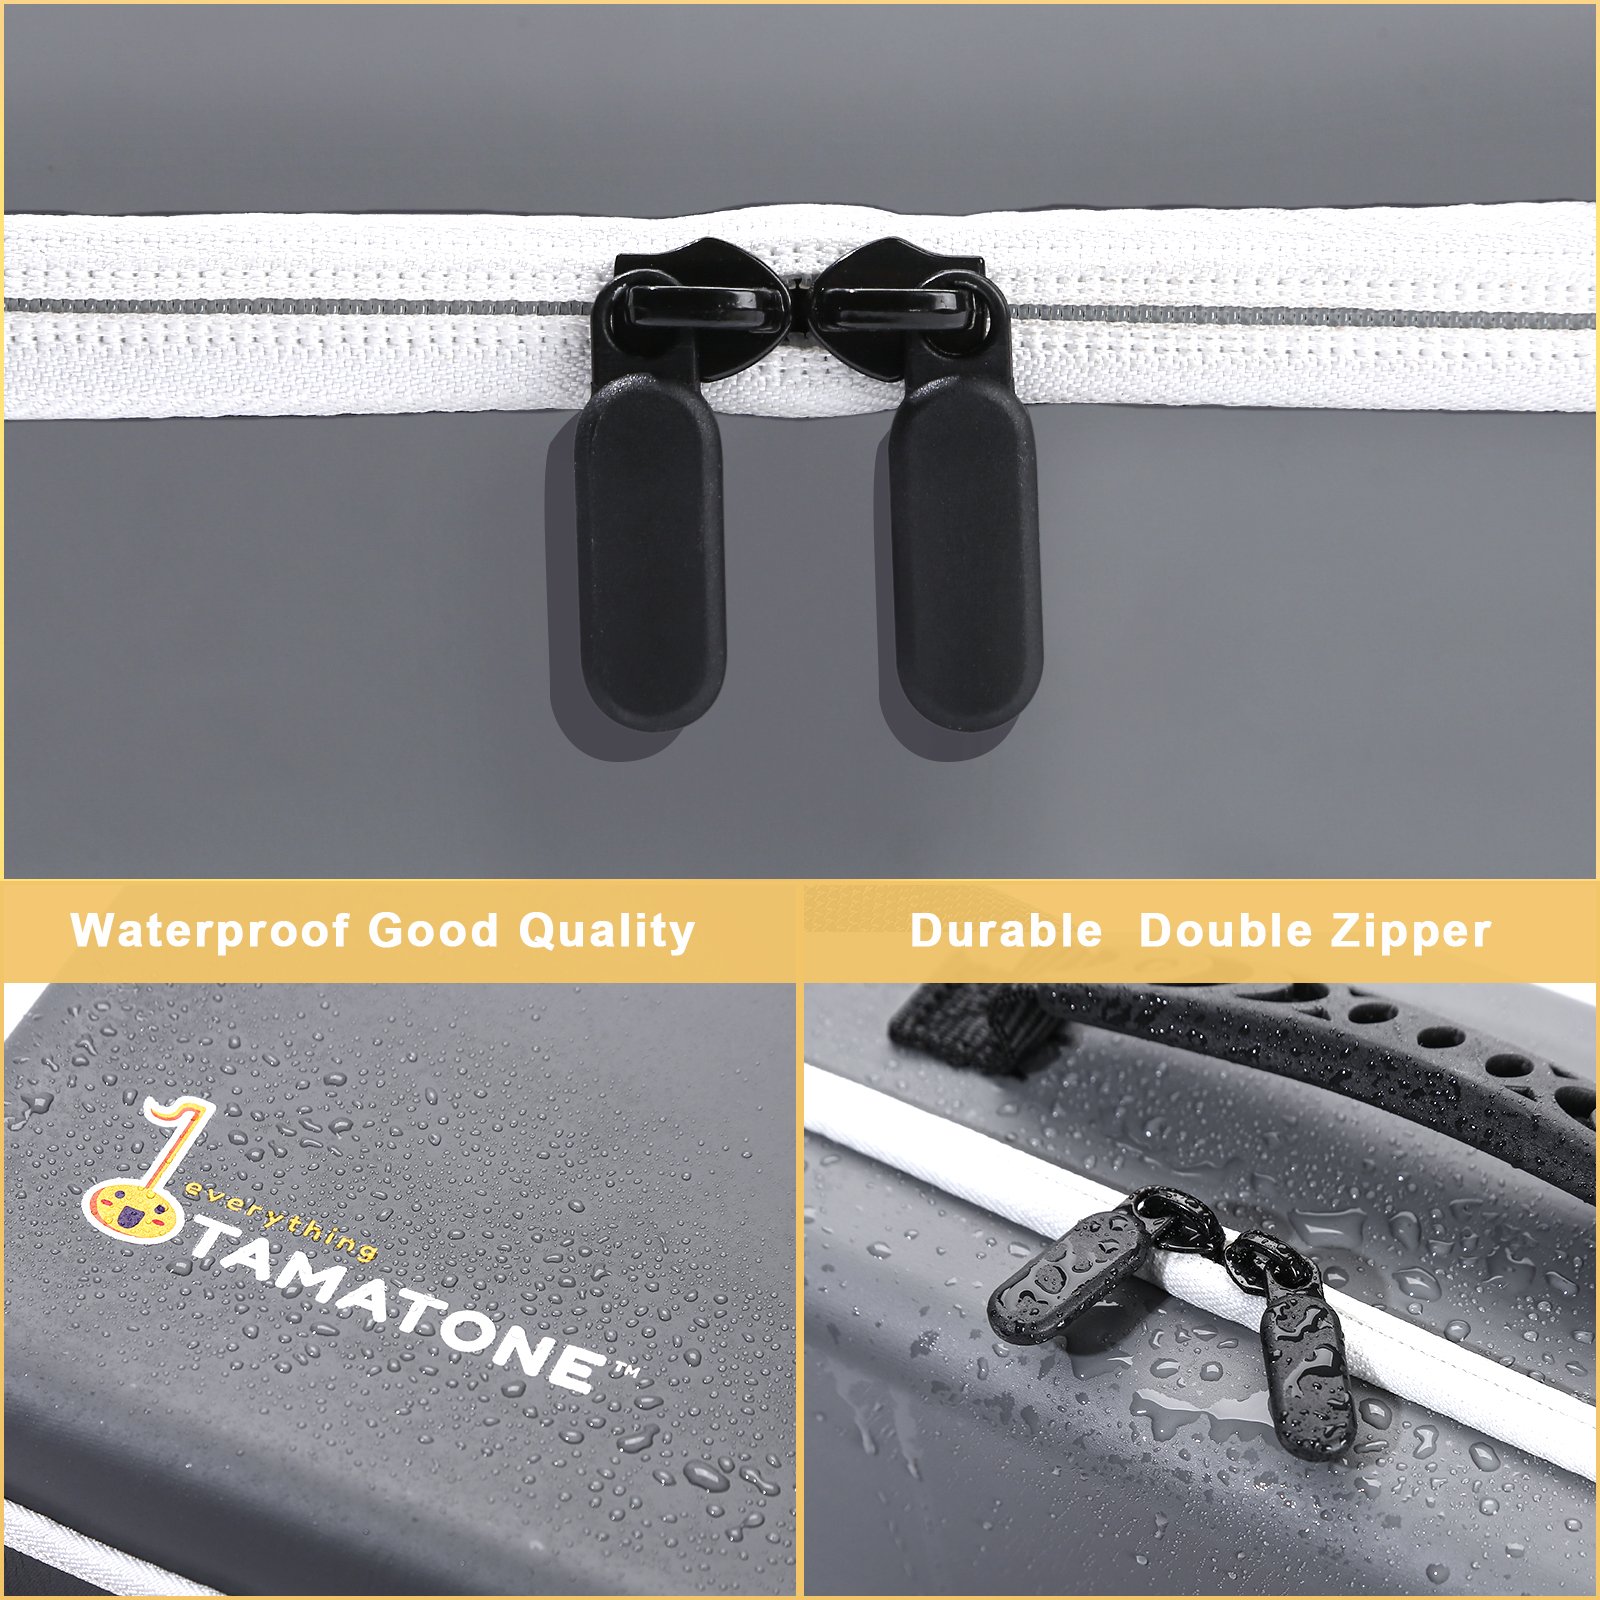 Protection Case for Otamatone Deluxe and Techno - Grey